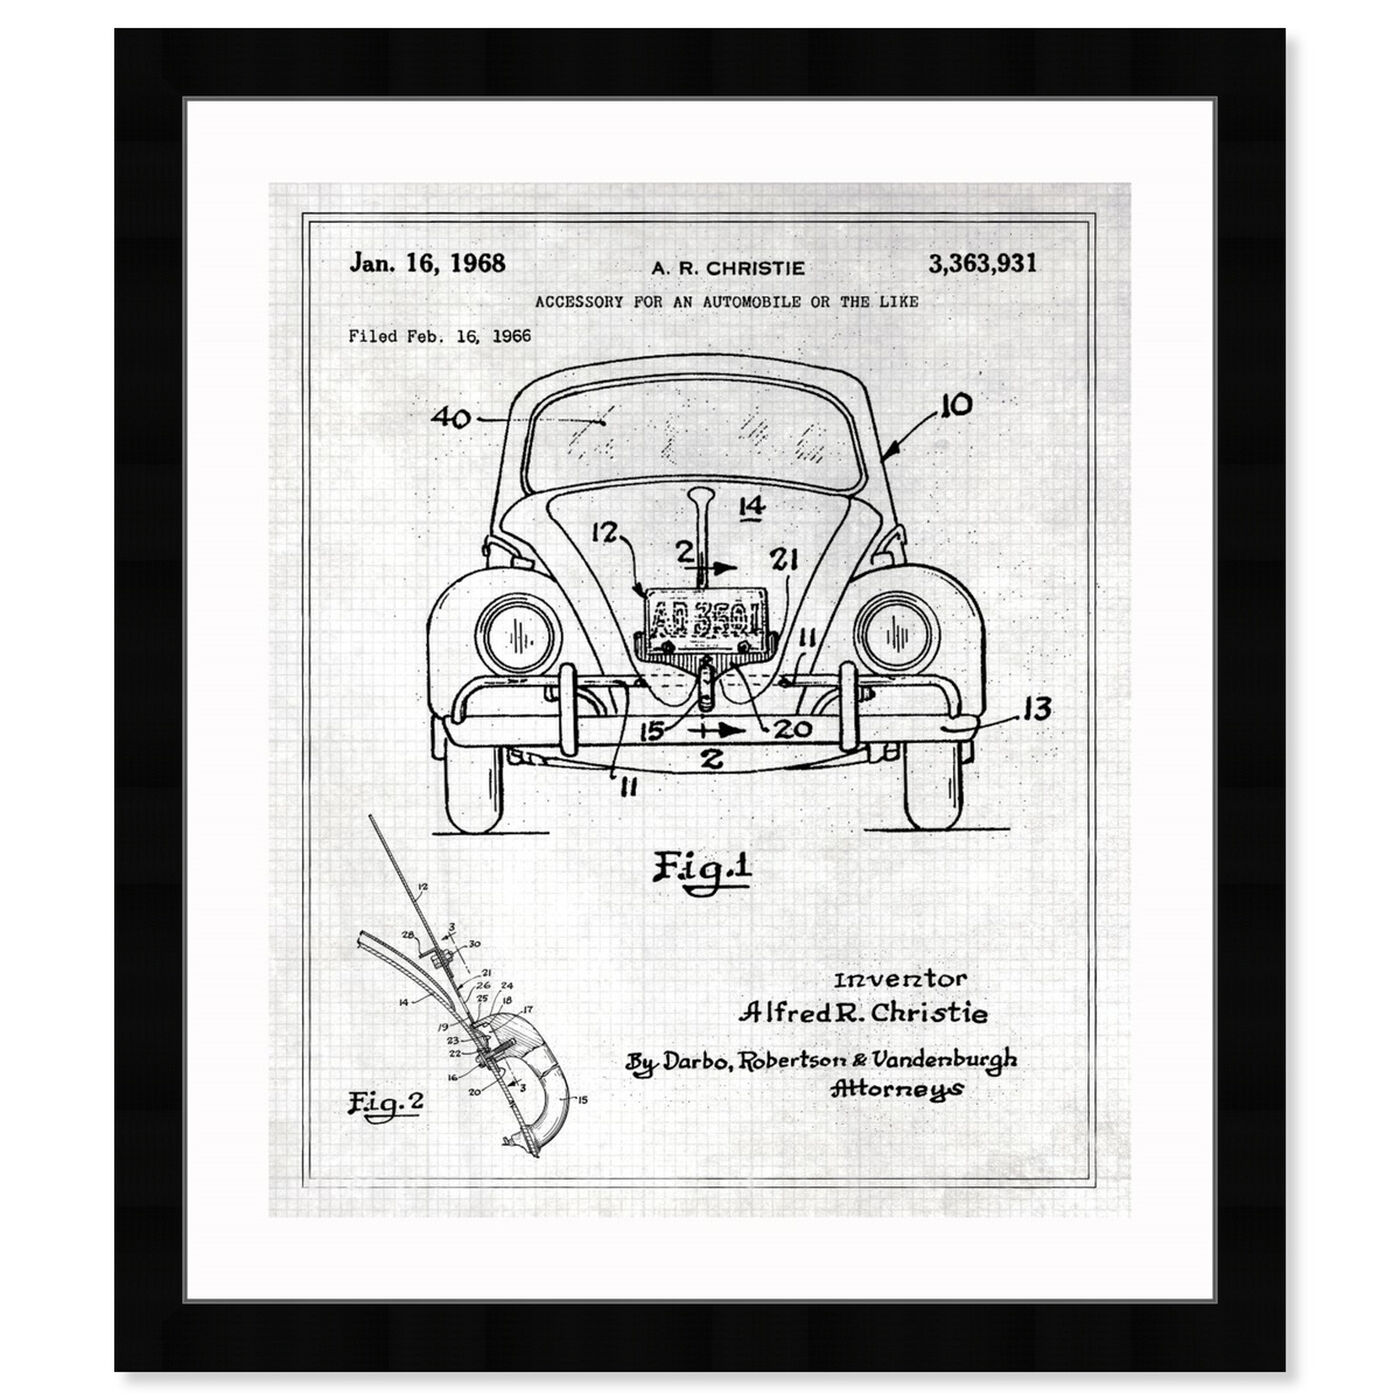 Front view of Accessory For An Automobile 1968 featuring transportation and automobiles art.